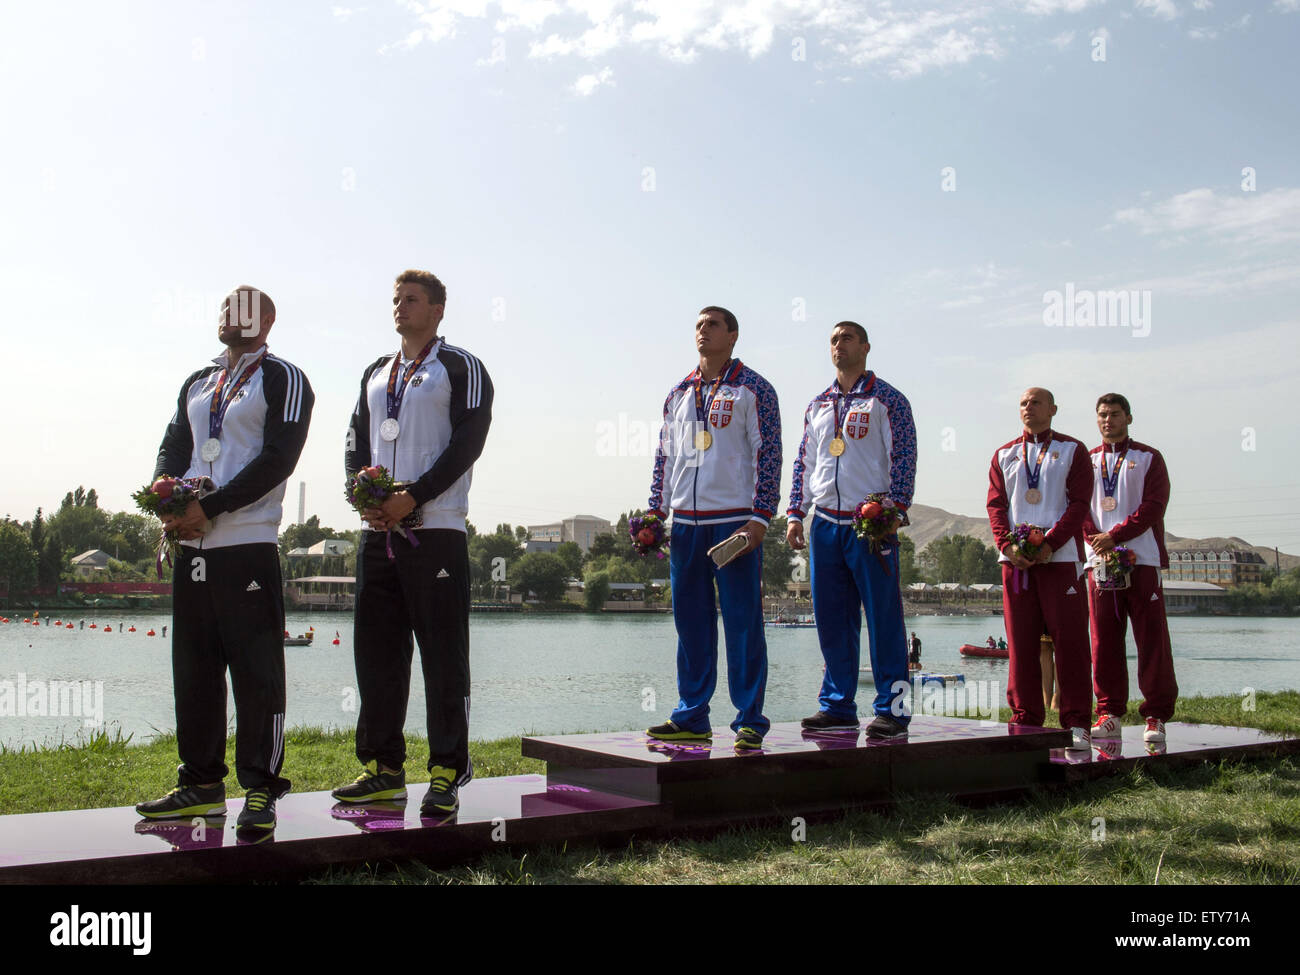 Baku, Azerbaijan. 16th June, 2015. Silver medalists Ronald Rauhe (L) and Tom Liebscher (2-L) of Germany, gold medalists Nebojsa Grujic (3-L) and Marko Novakovic of Serbia (3-R) and bronze medalists Peter Molnar (2-R) and Sandor Totka (R) of Hungary attend Stock Photo